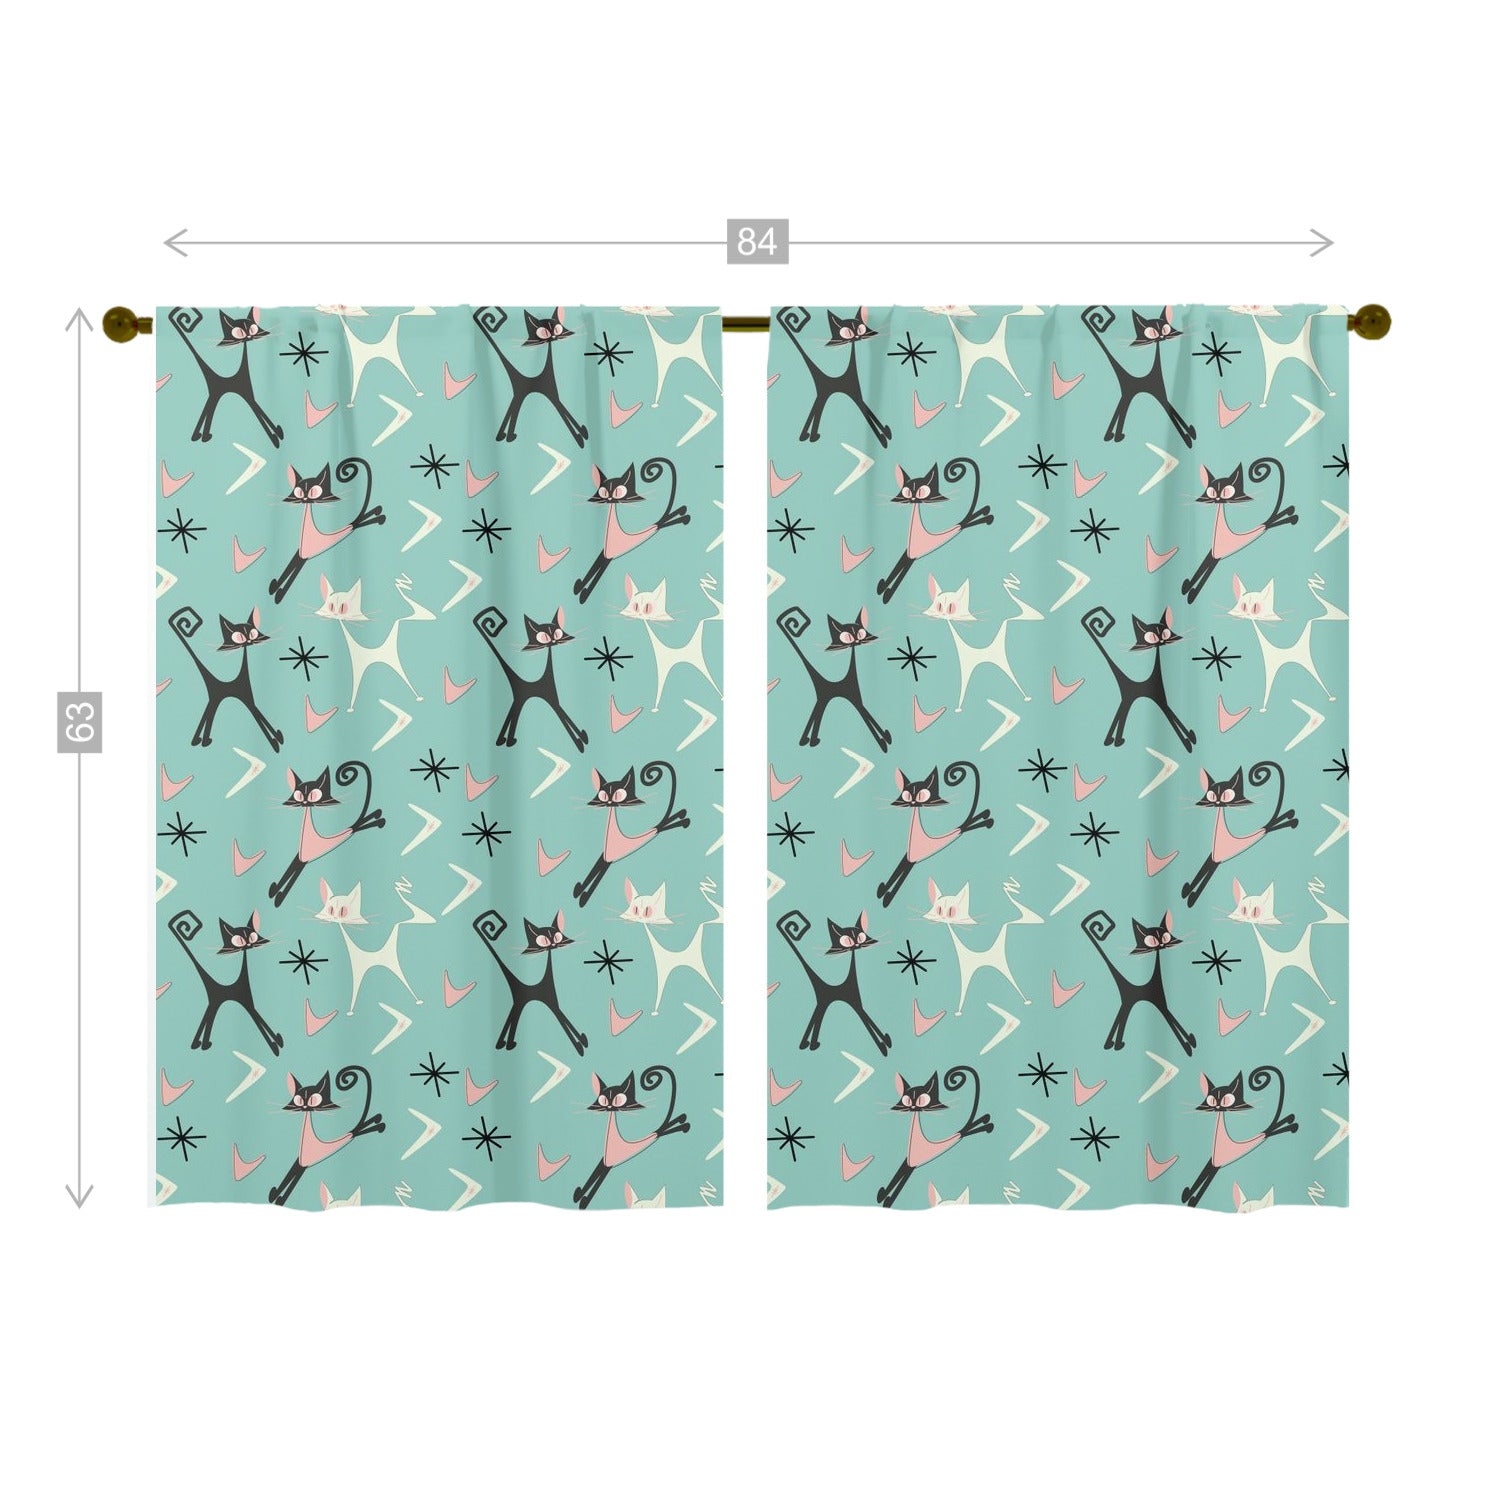 Atomic Cats, Whimsical Mid Century Modern Boomerangs, Kitshy 50s Vintage Style Window Curtains (two panels)